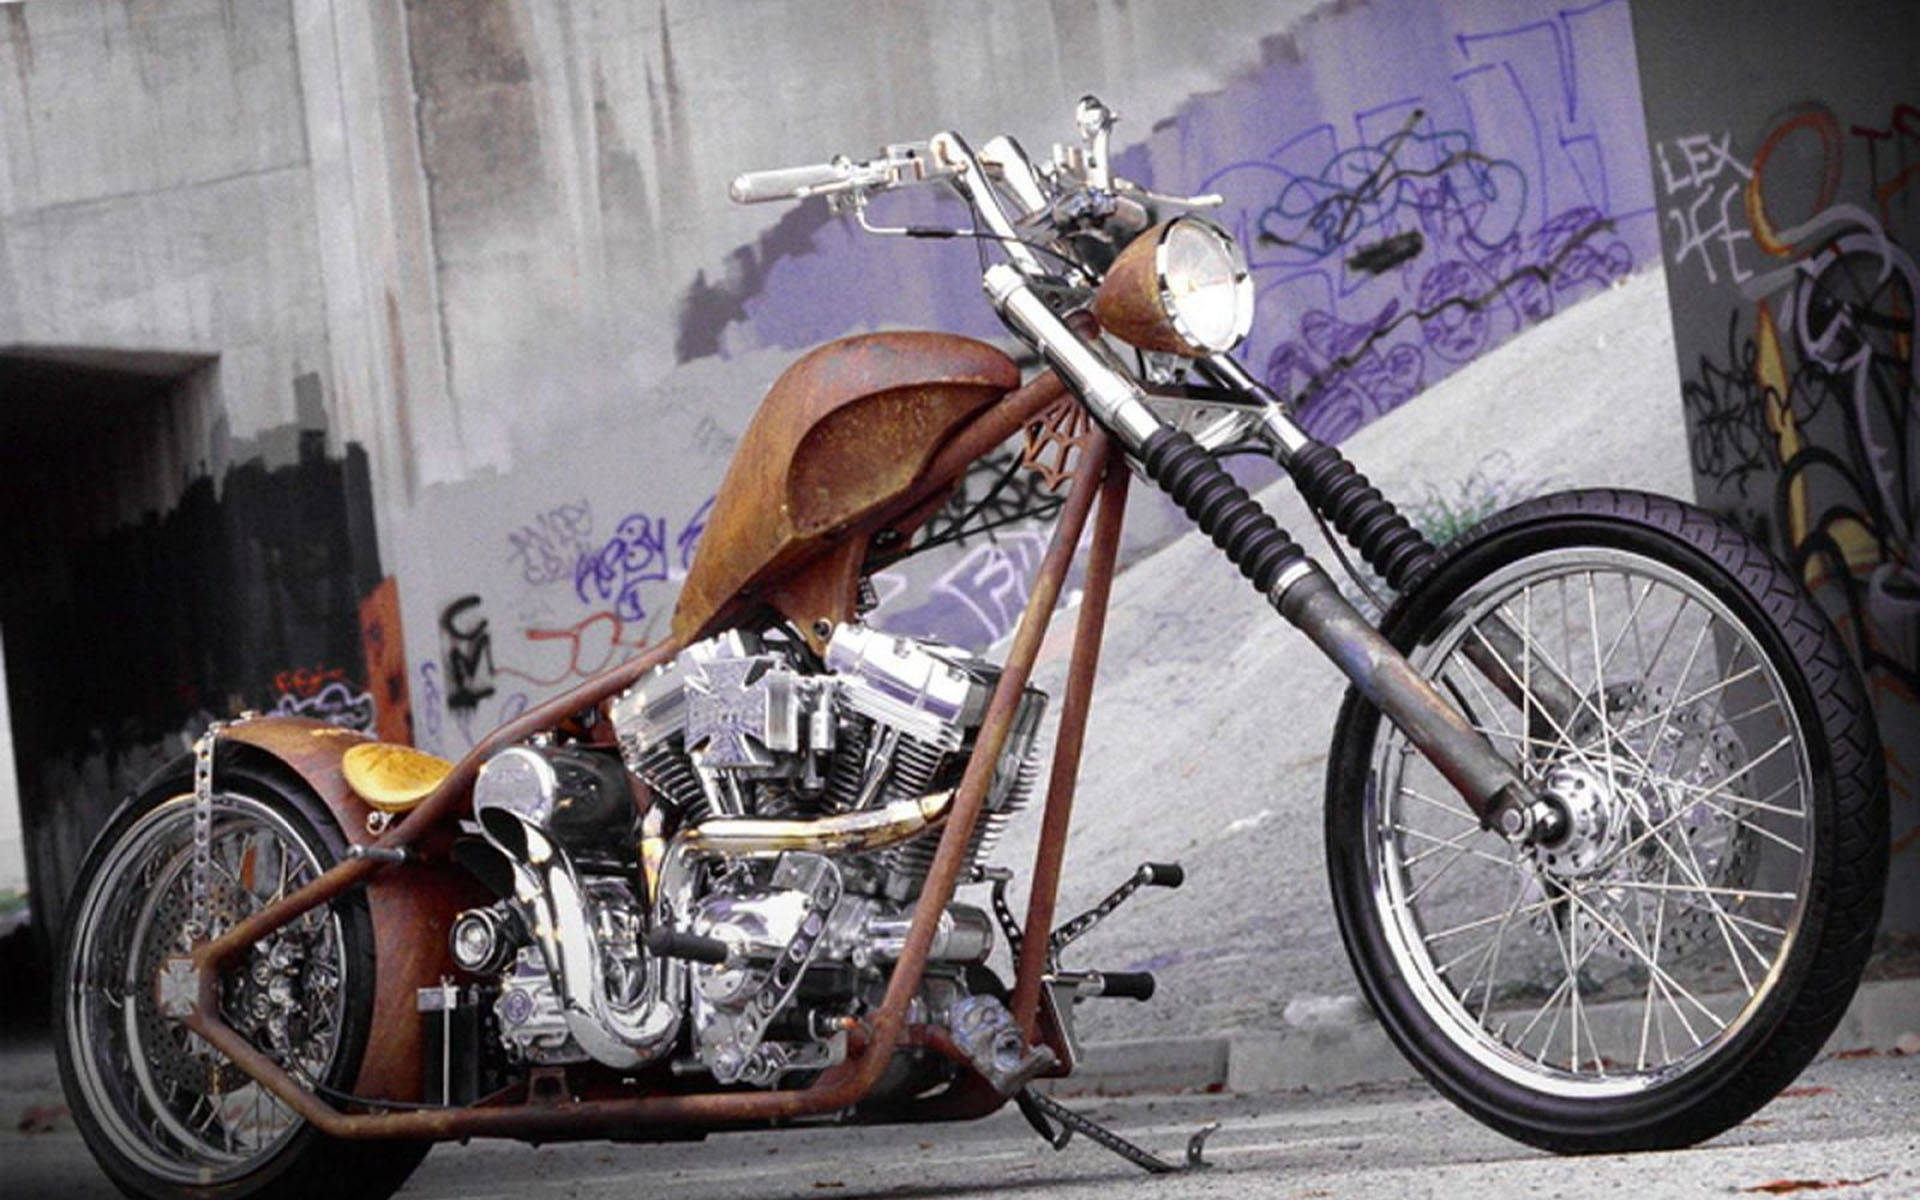 West Coast Choppers Rustic Motorcycle Tapet Wallpaper